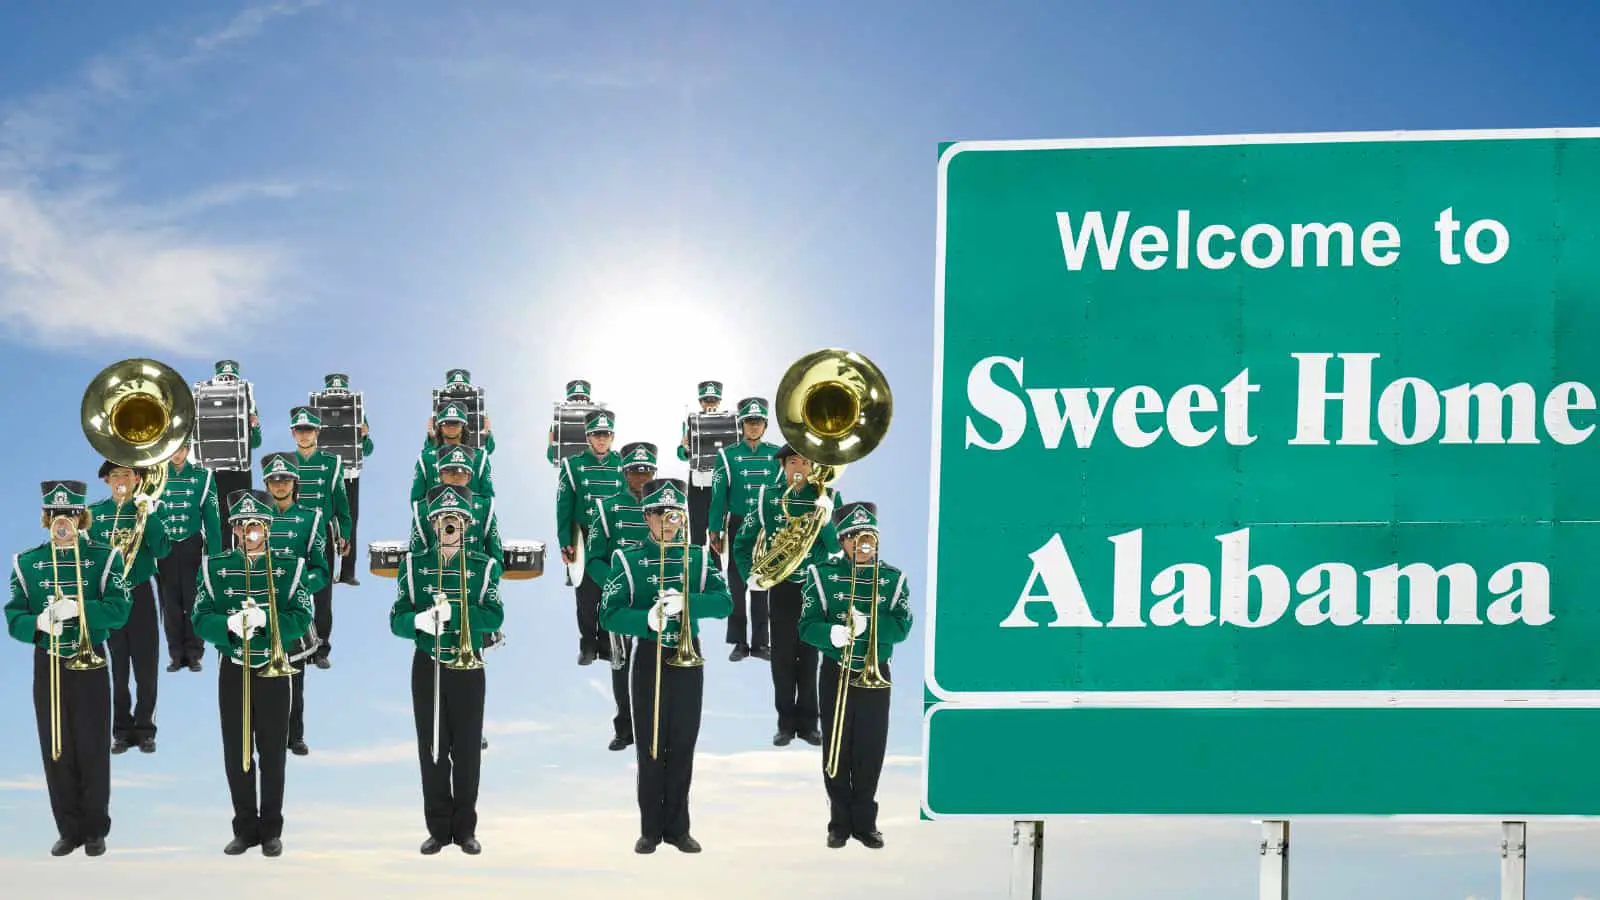 List of ALL Marching Bands in Alabama (College & High School)